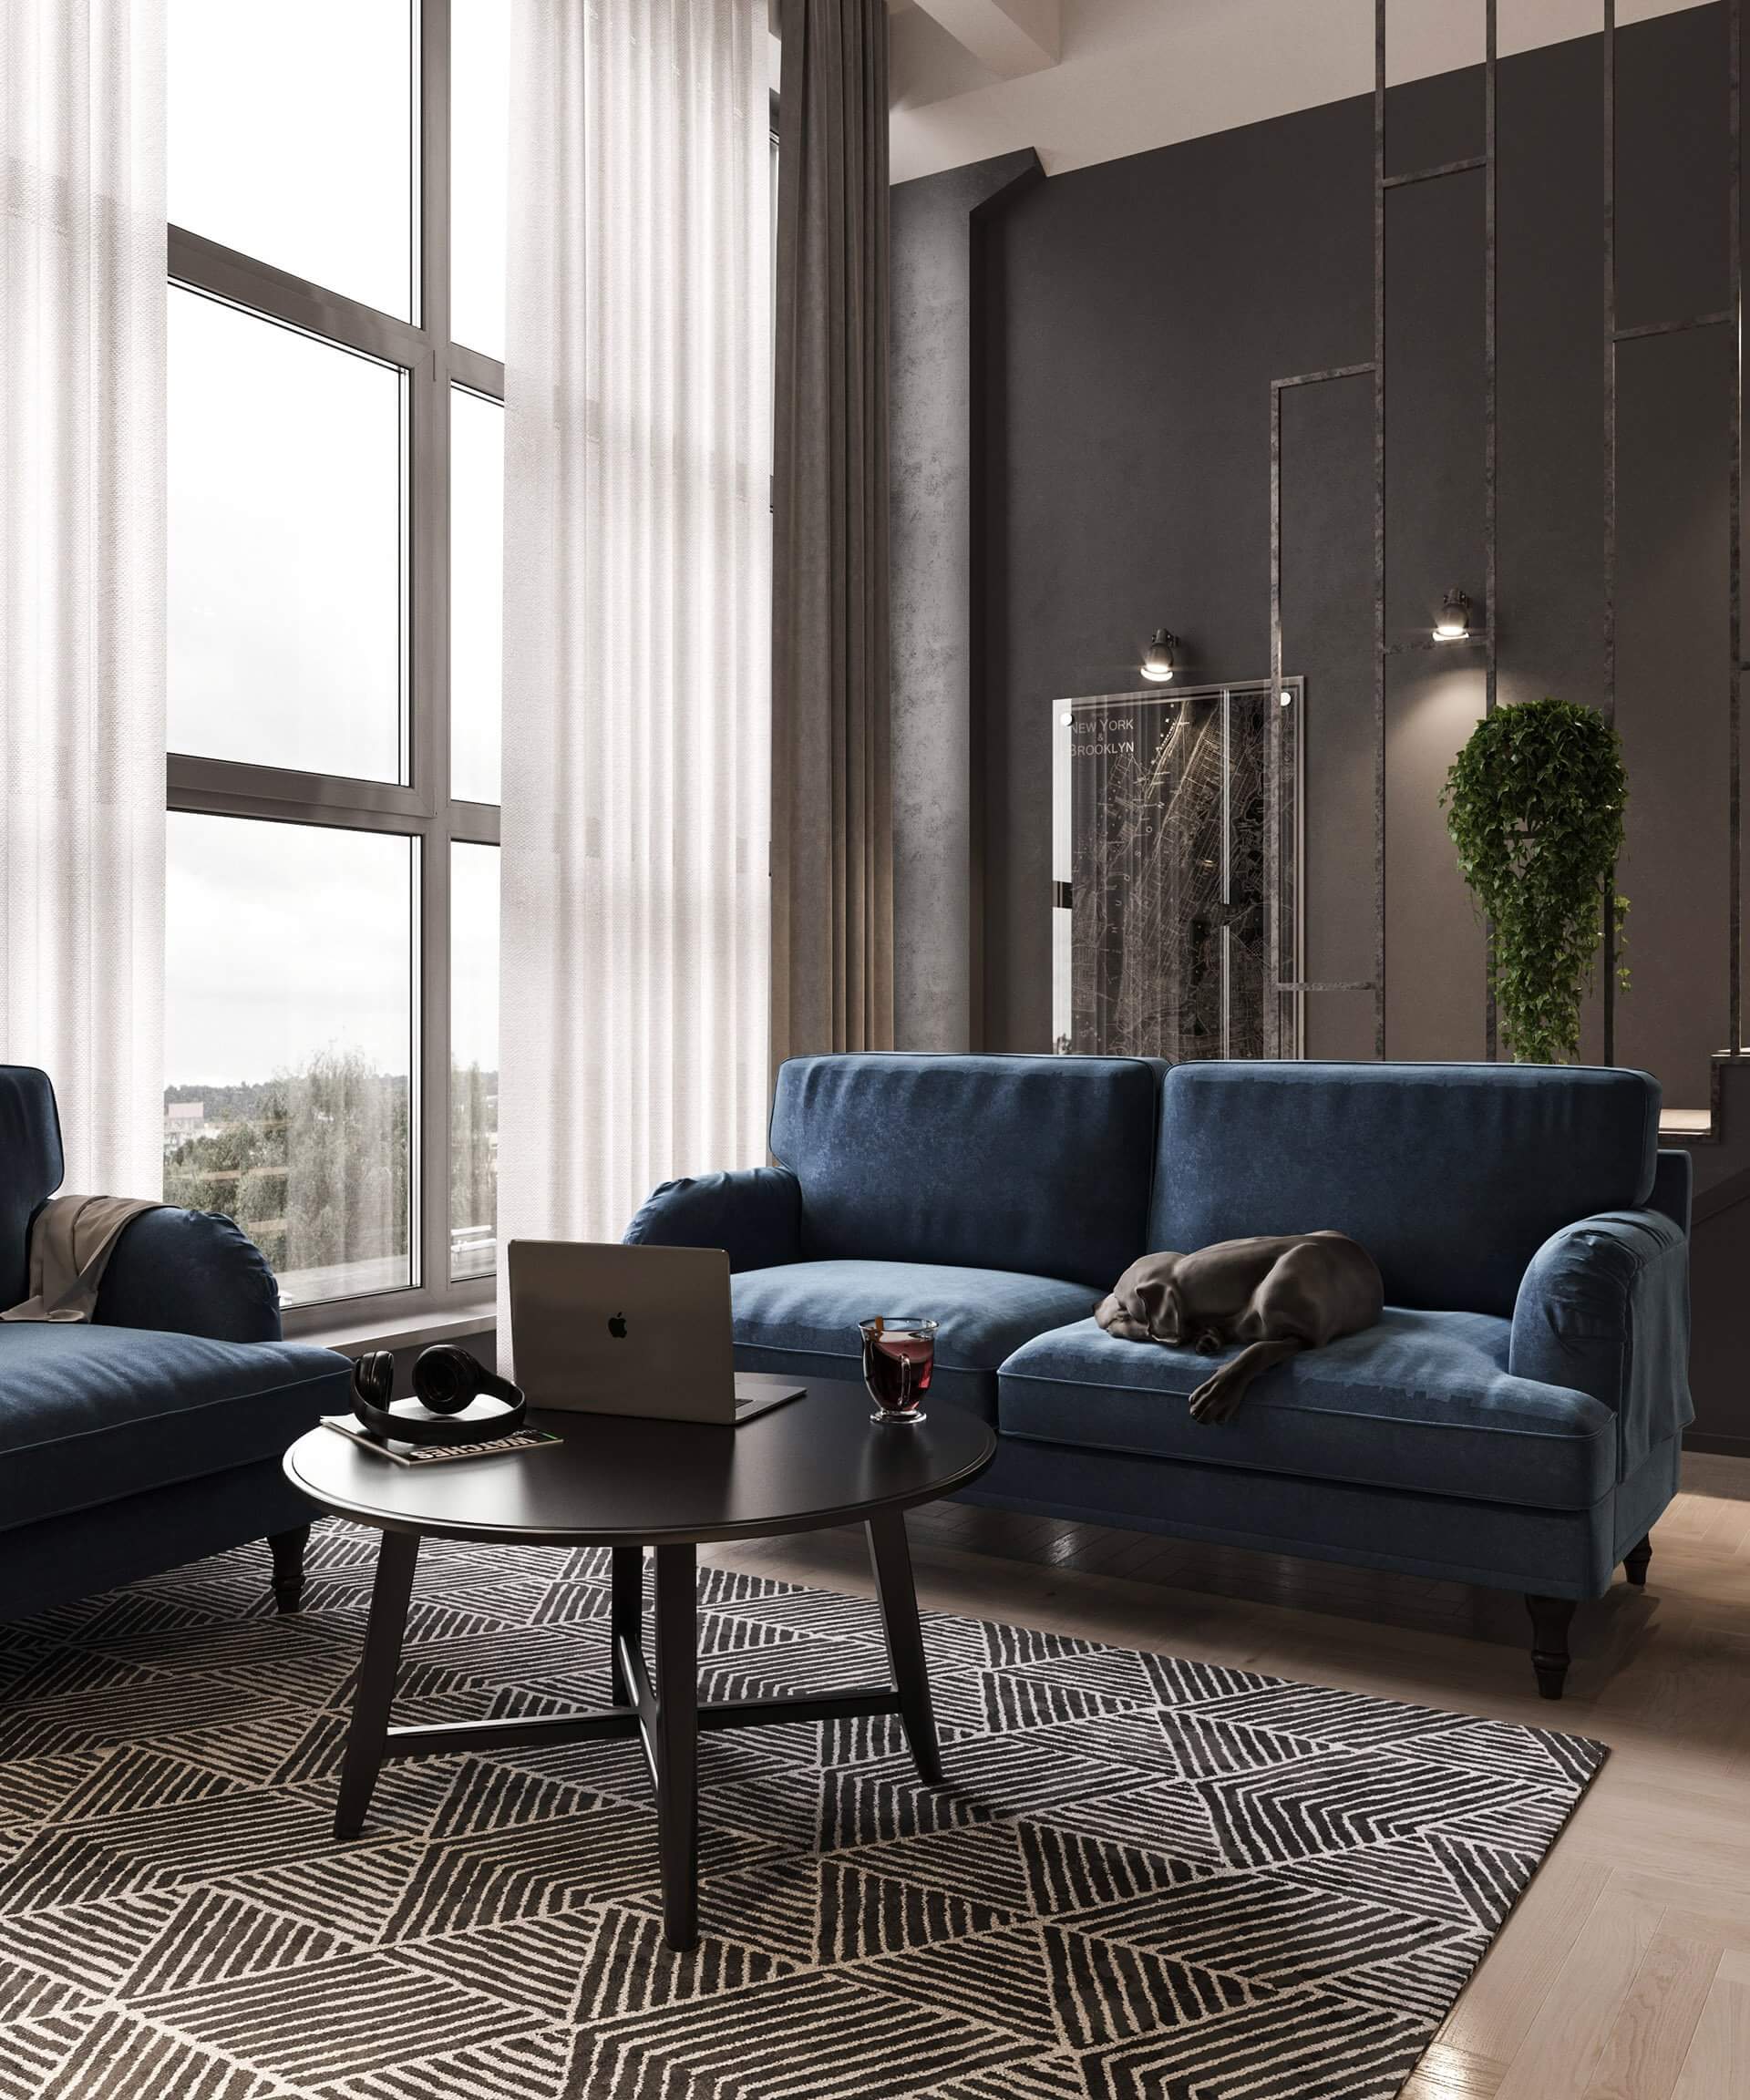 Small House 38 design living room blue fabric couch - cgi visualization